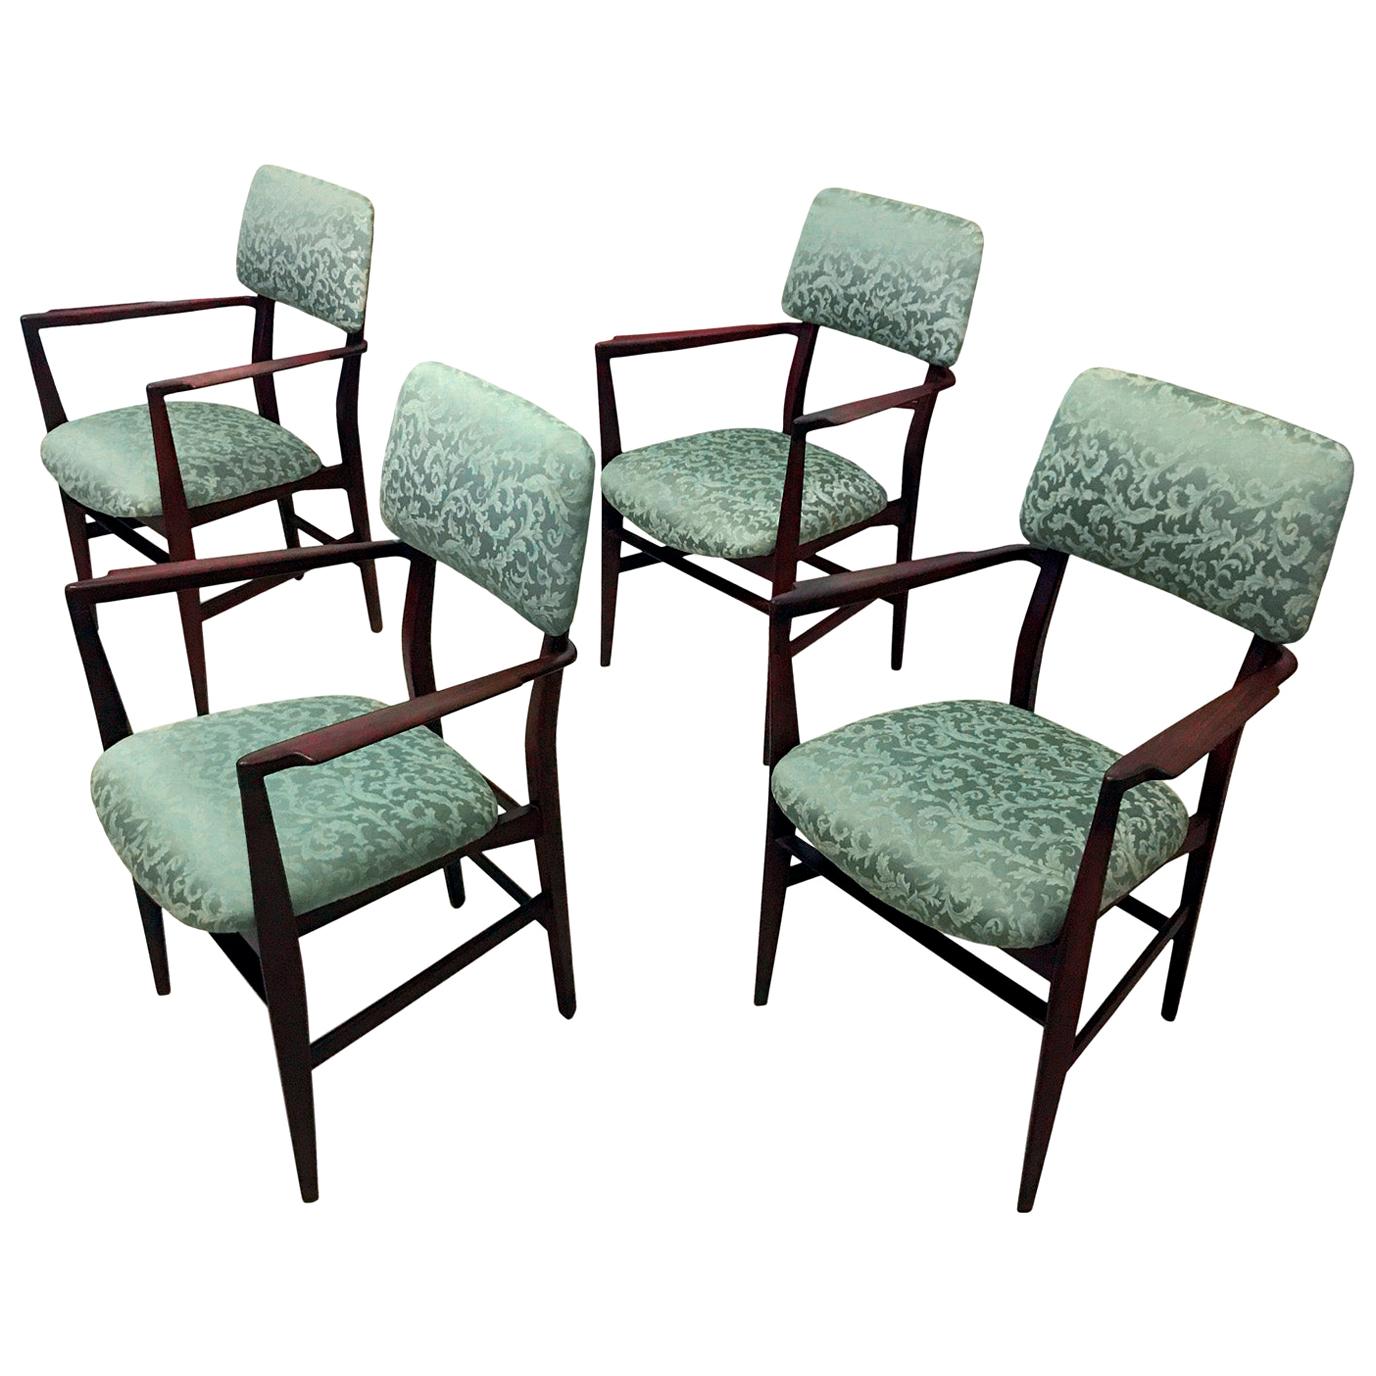 Italian Teakwood and Green Dining Chairs by Vittorio Dassi, Set of 4, 1950s